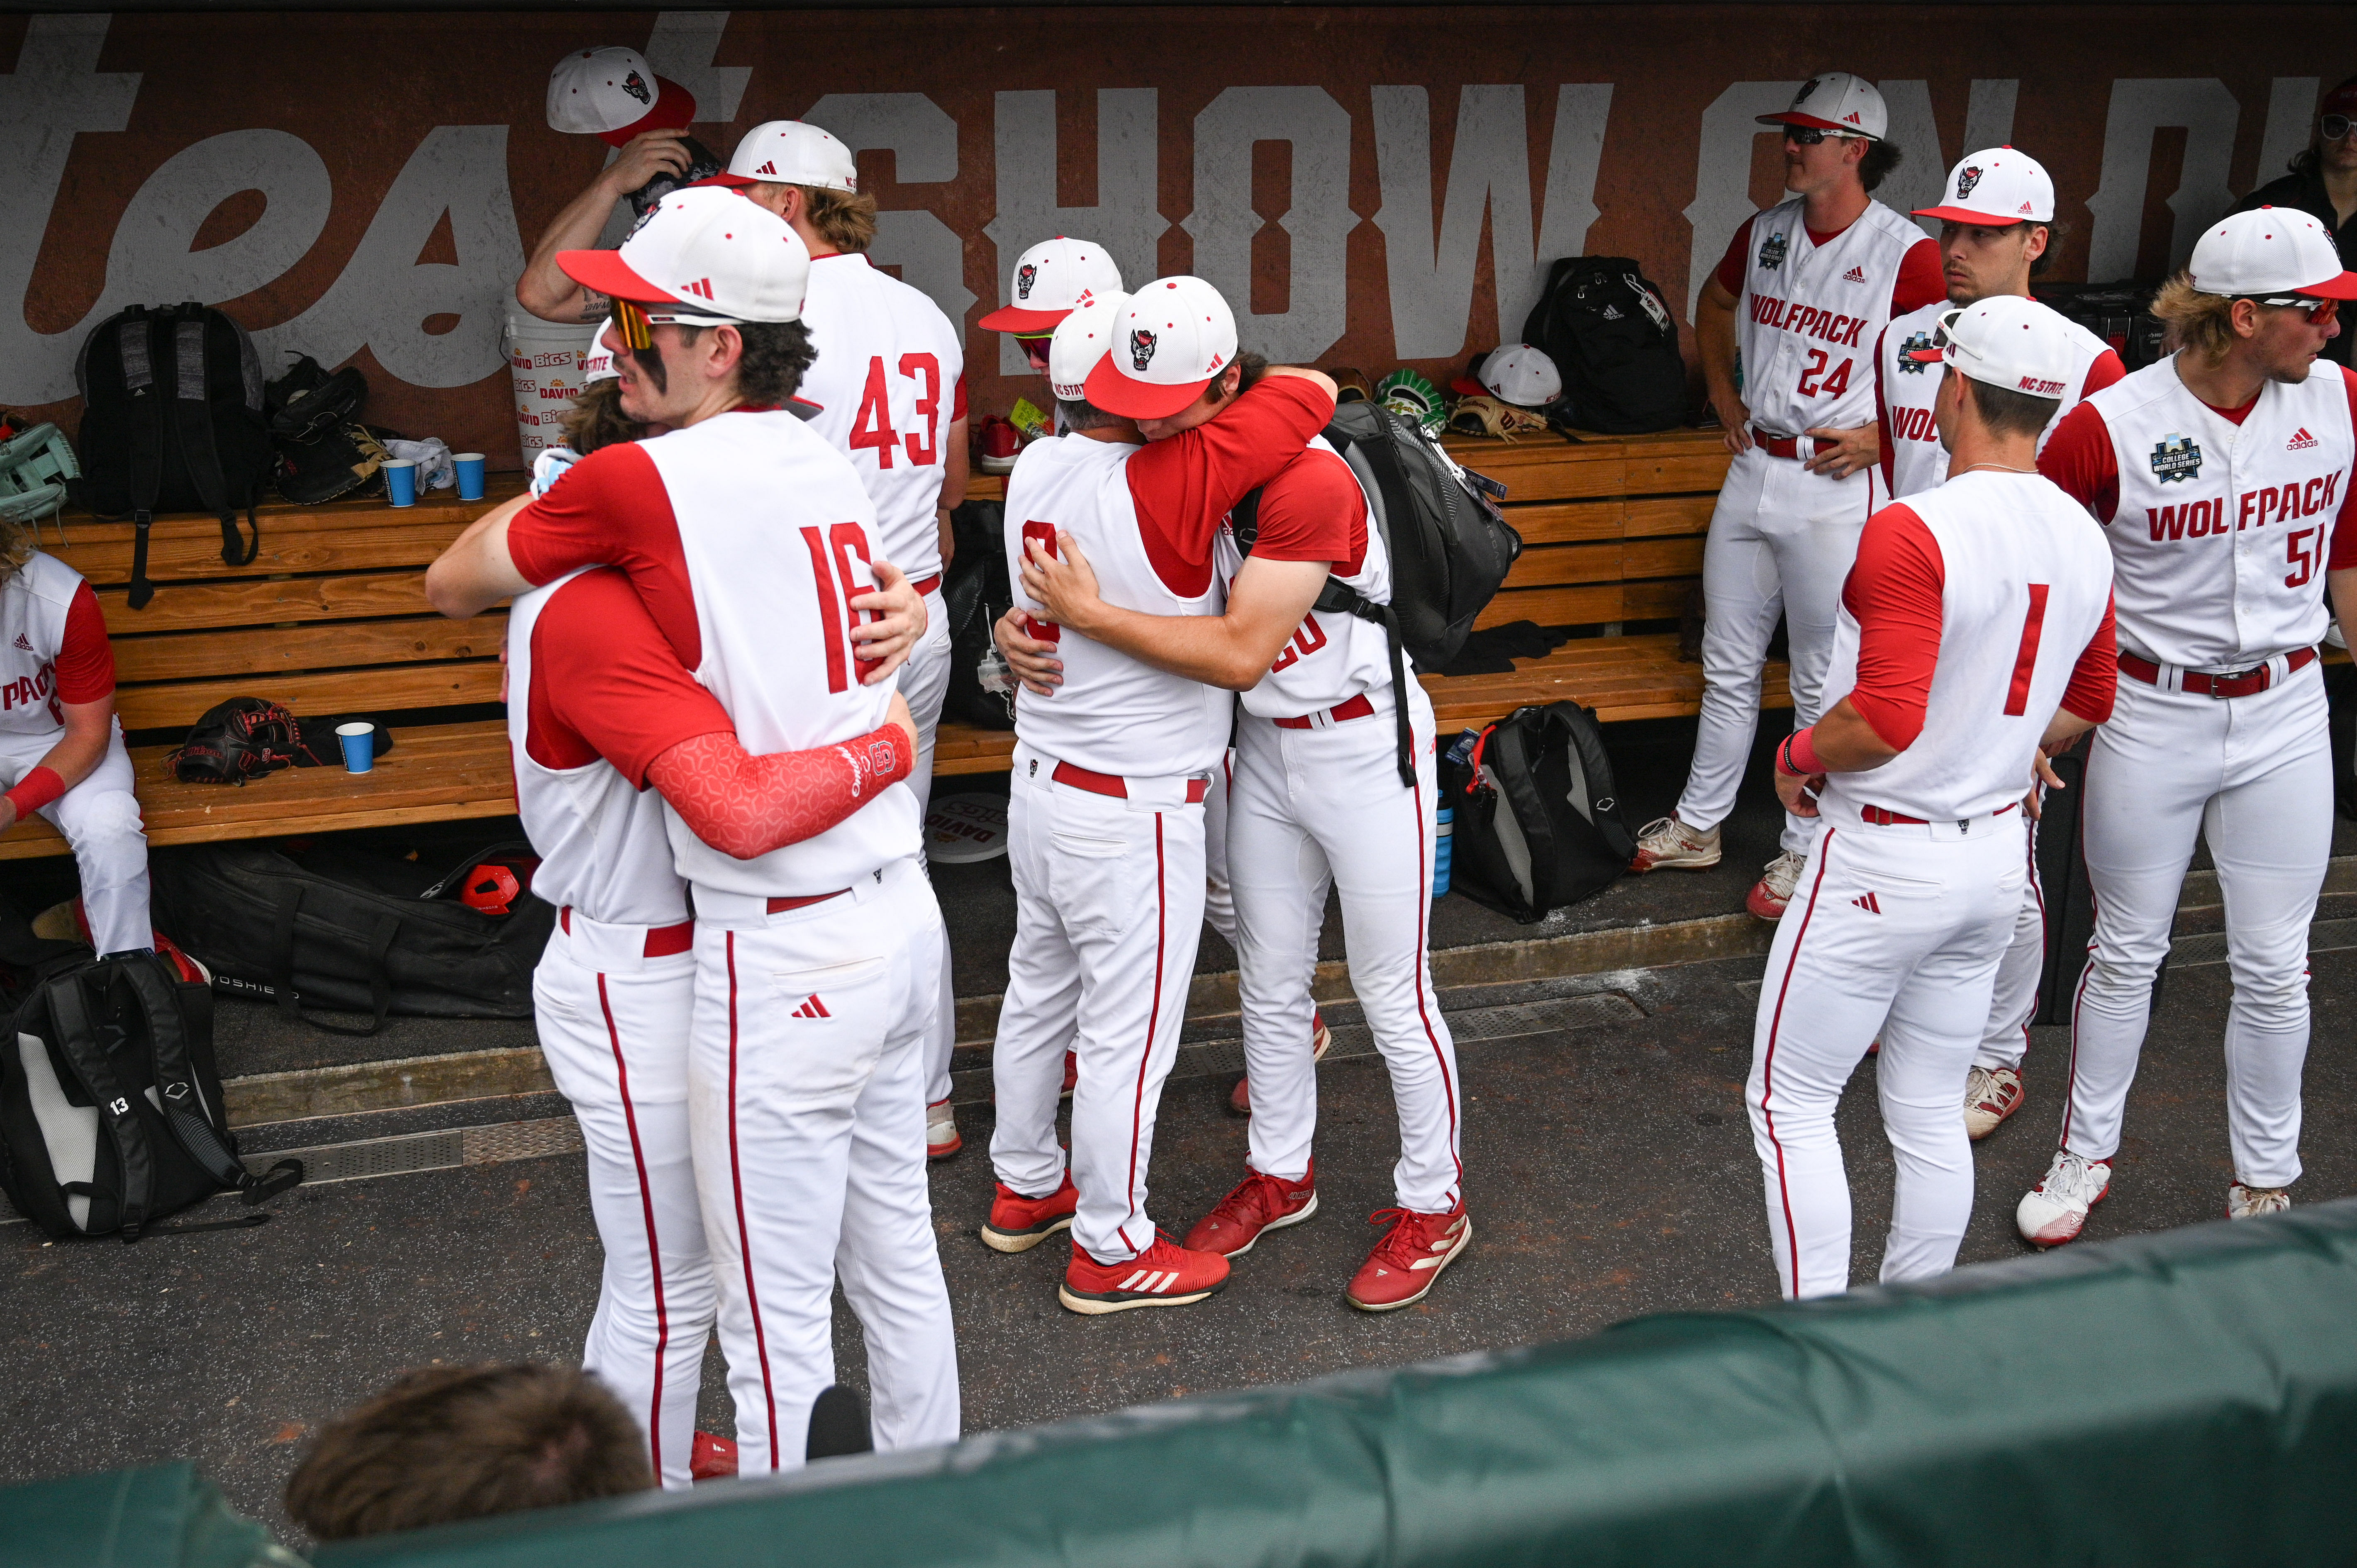 The NC State Wolfpack endured a difficult College World Series this year. (Image credit: Imagn)